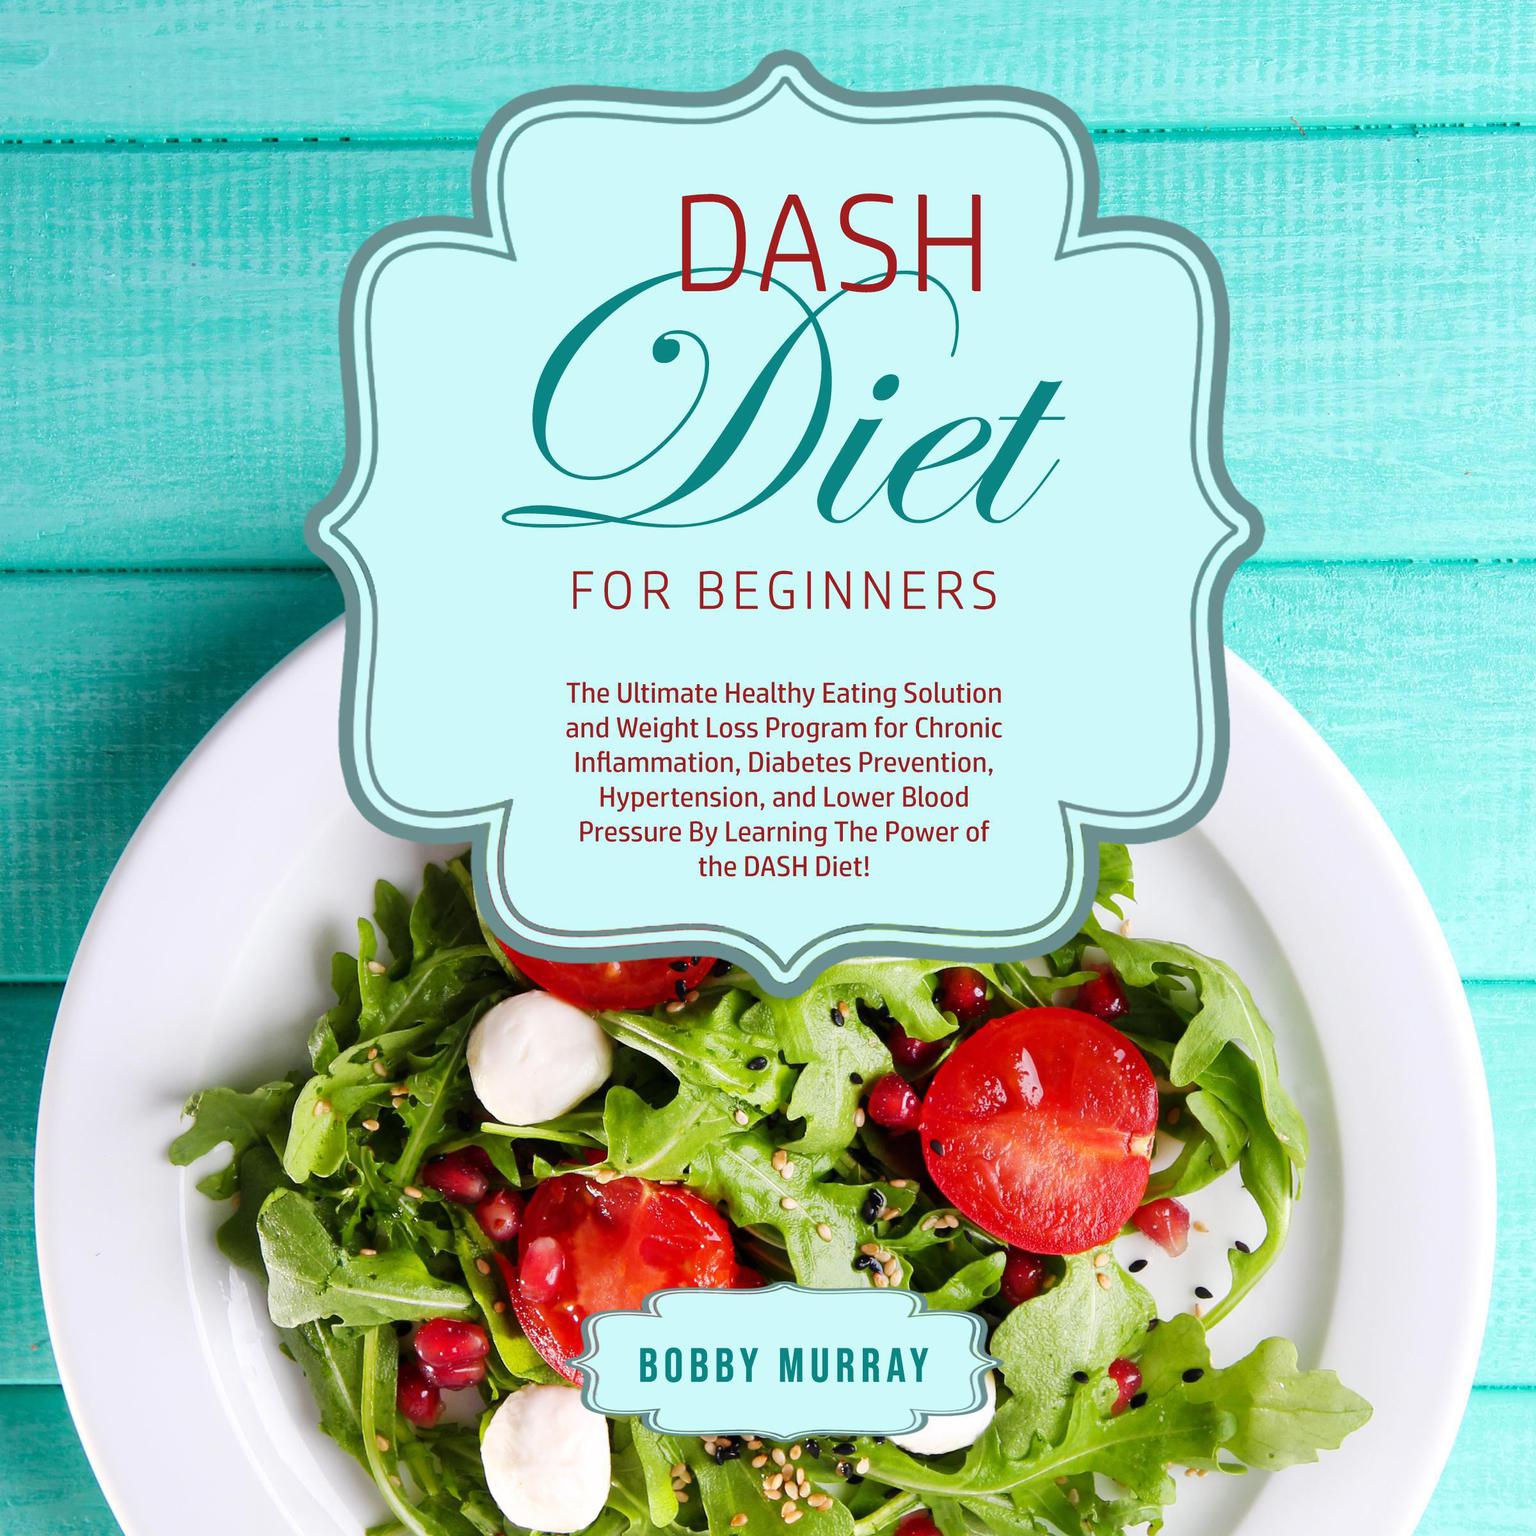 DASH Diet for Beginners: The Ultimate Healthy Eating Solution and Weight Loss Program for Chronic Inflammation, Diabetes Prevention, Hypertension, and Lower Blood Pressure By Learning The Power of the DASH Diet! Audiobook, by Bobby Murray